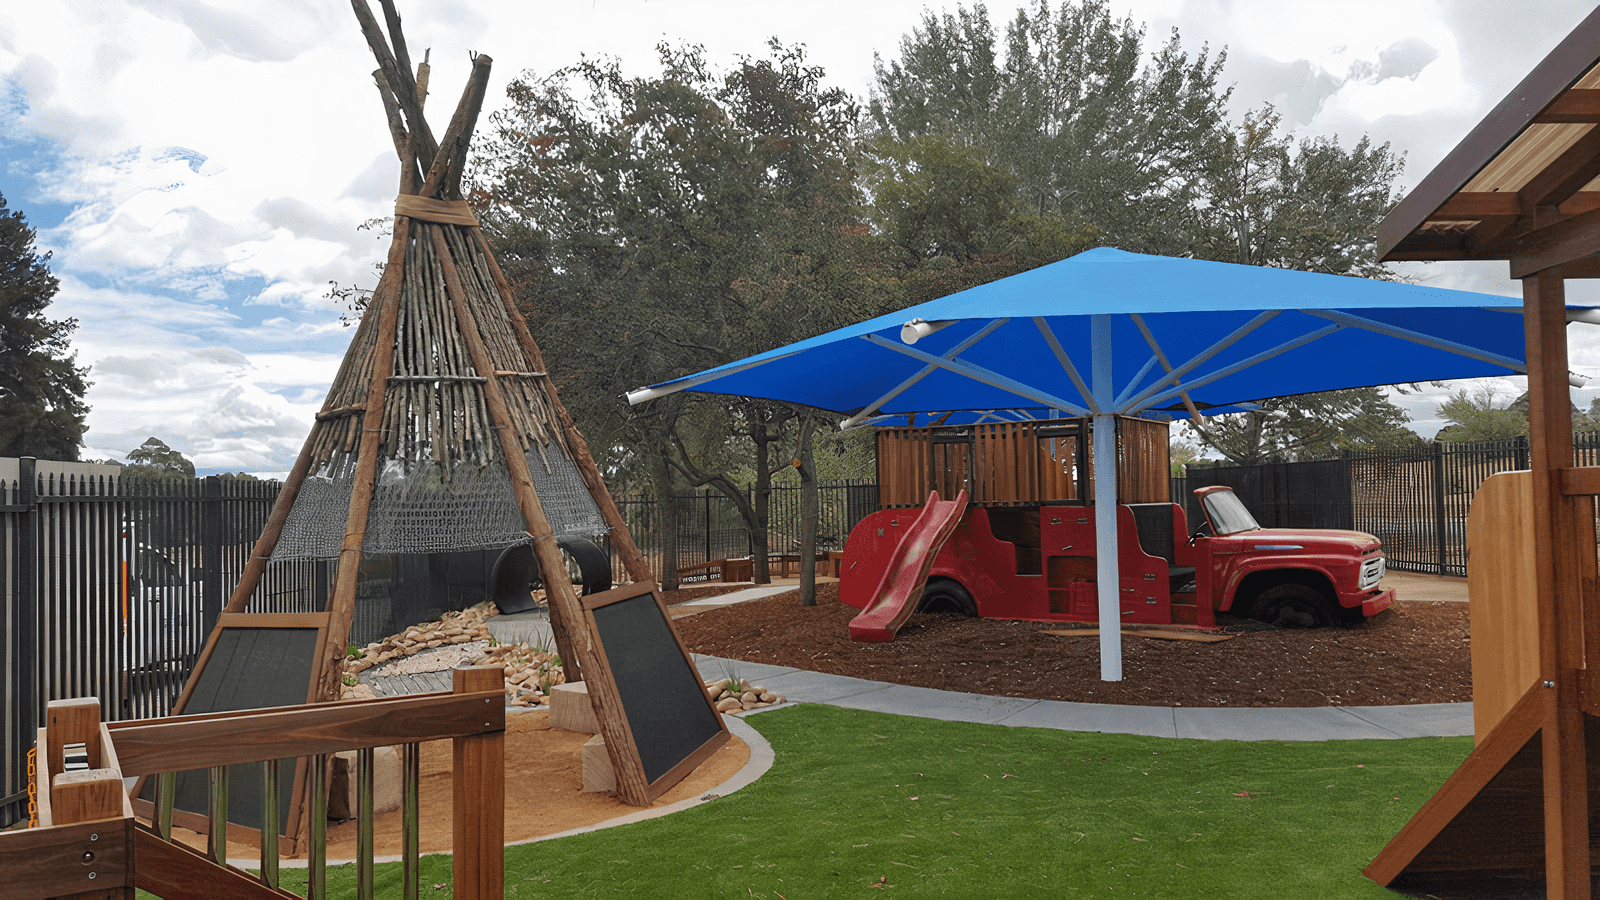 Inclusive play area with wheelchair accessiblity